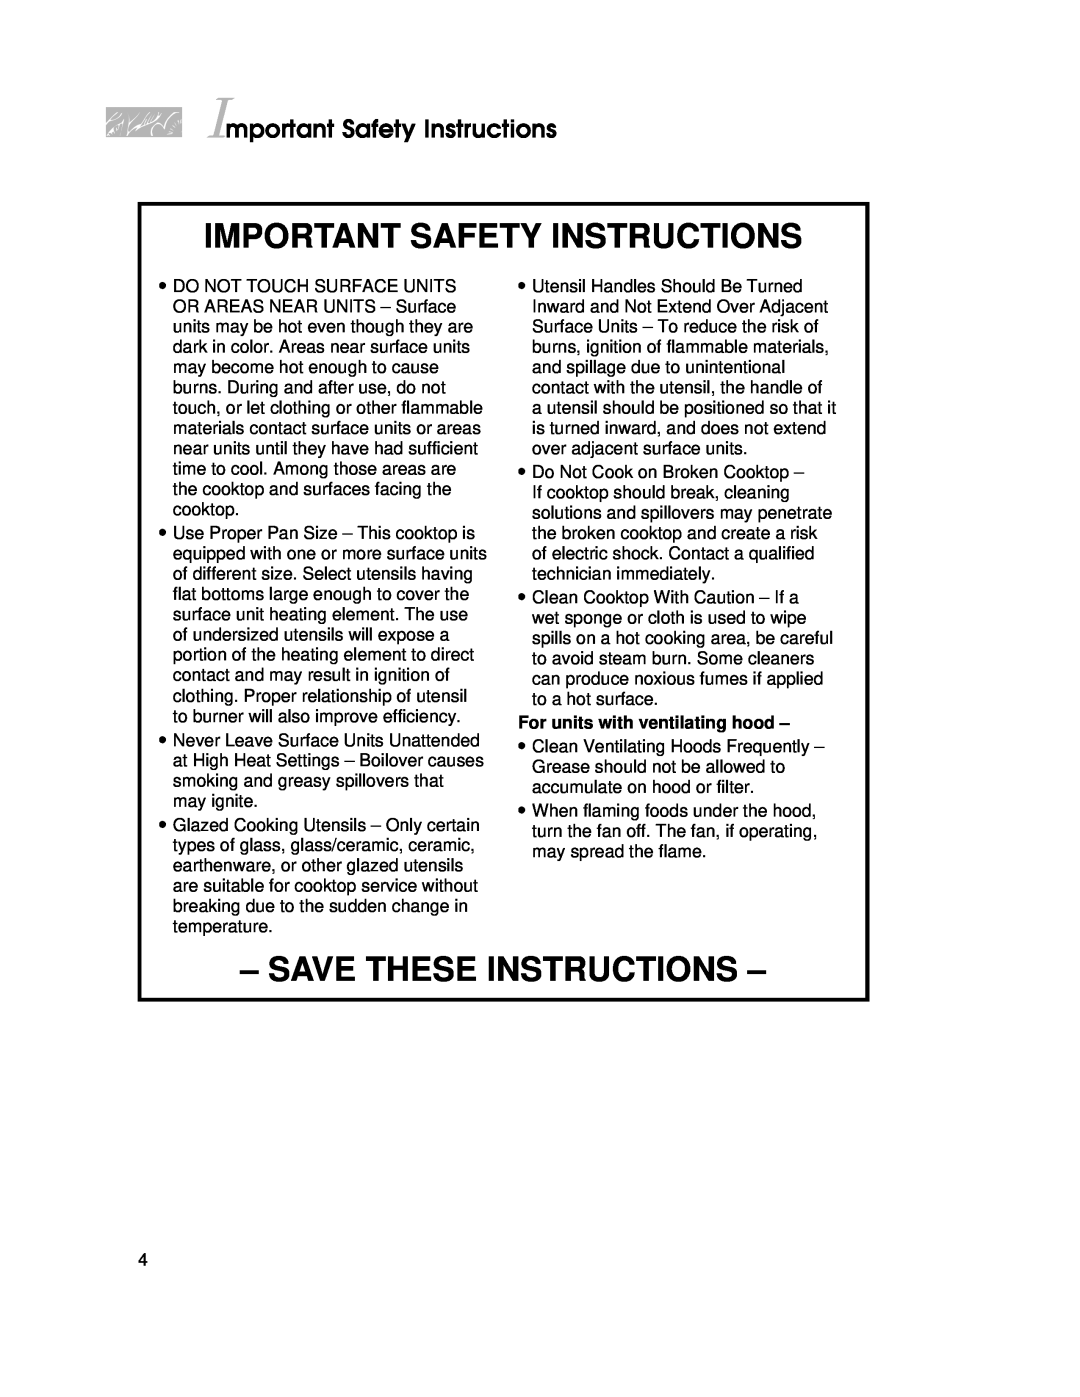 KitchenAid KECC027, KSVD060B Important Safety Instructions, Save These Instructions, For units with ventilating hood 